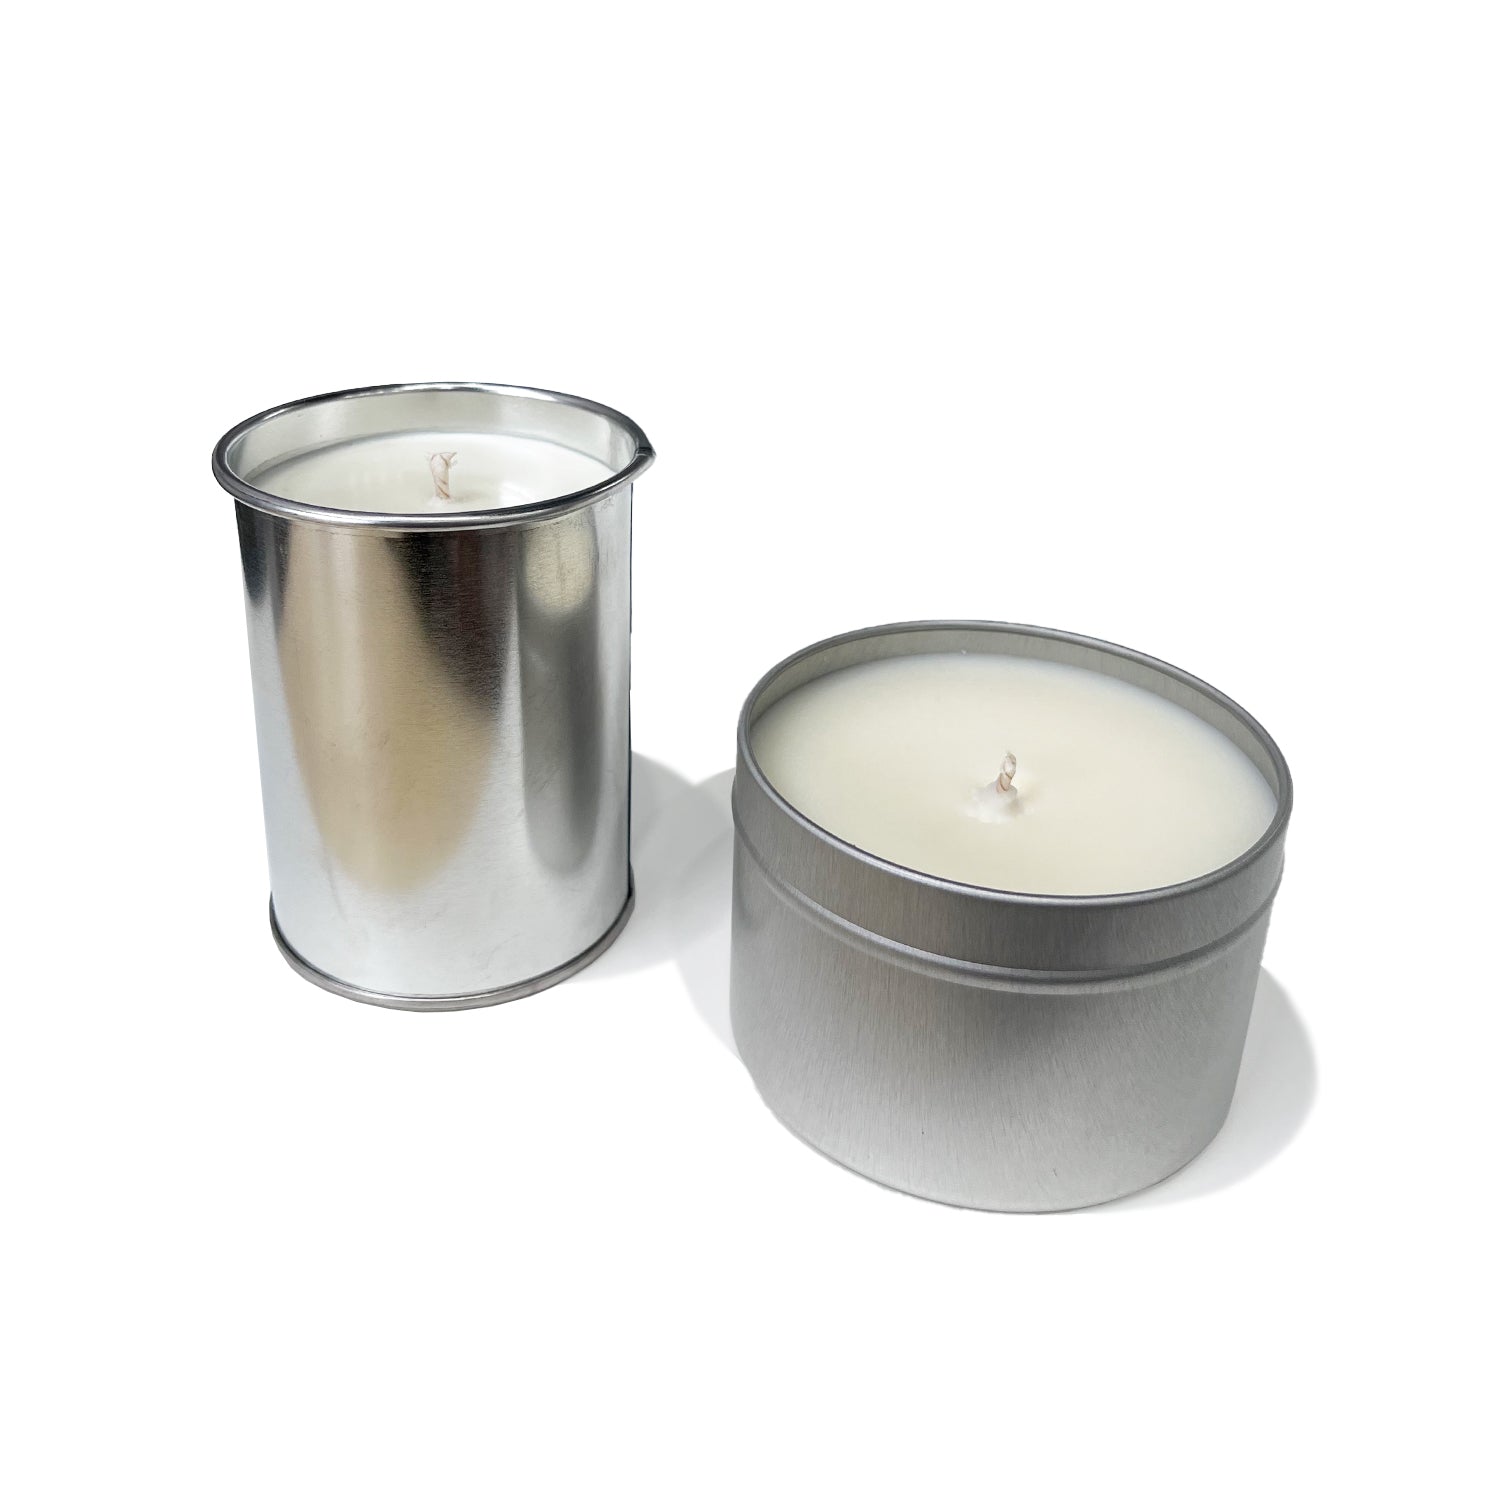 Vanilla Bean, Soy Candle | eco+amour